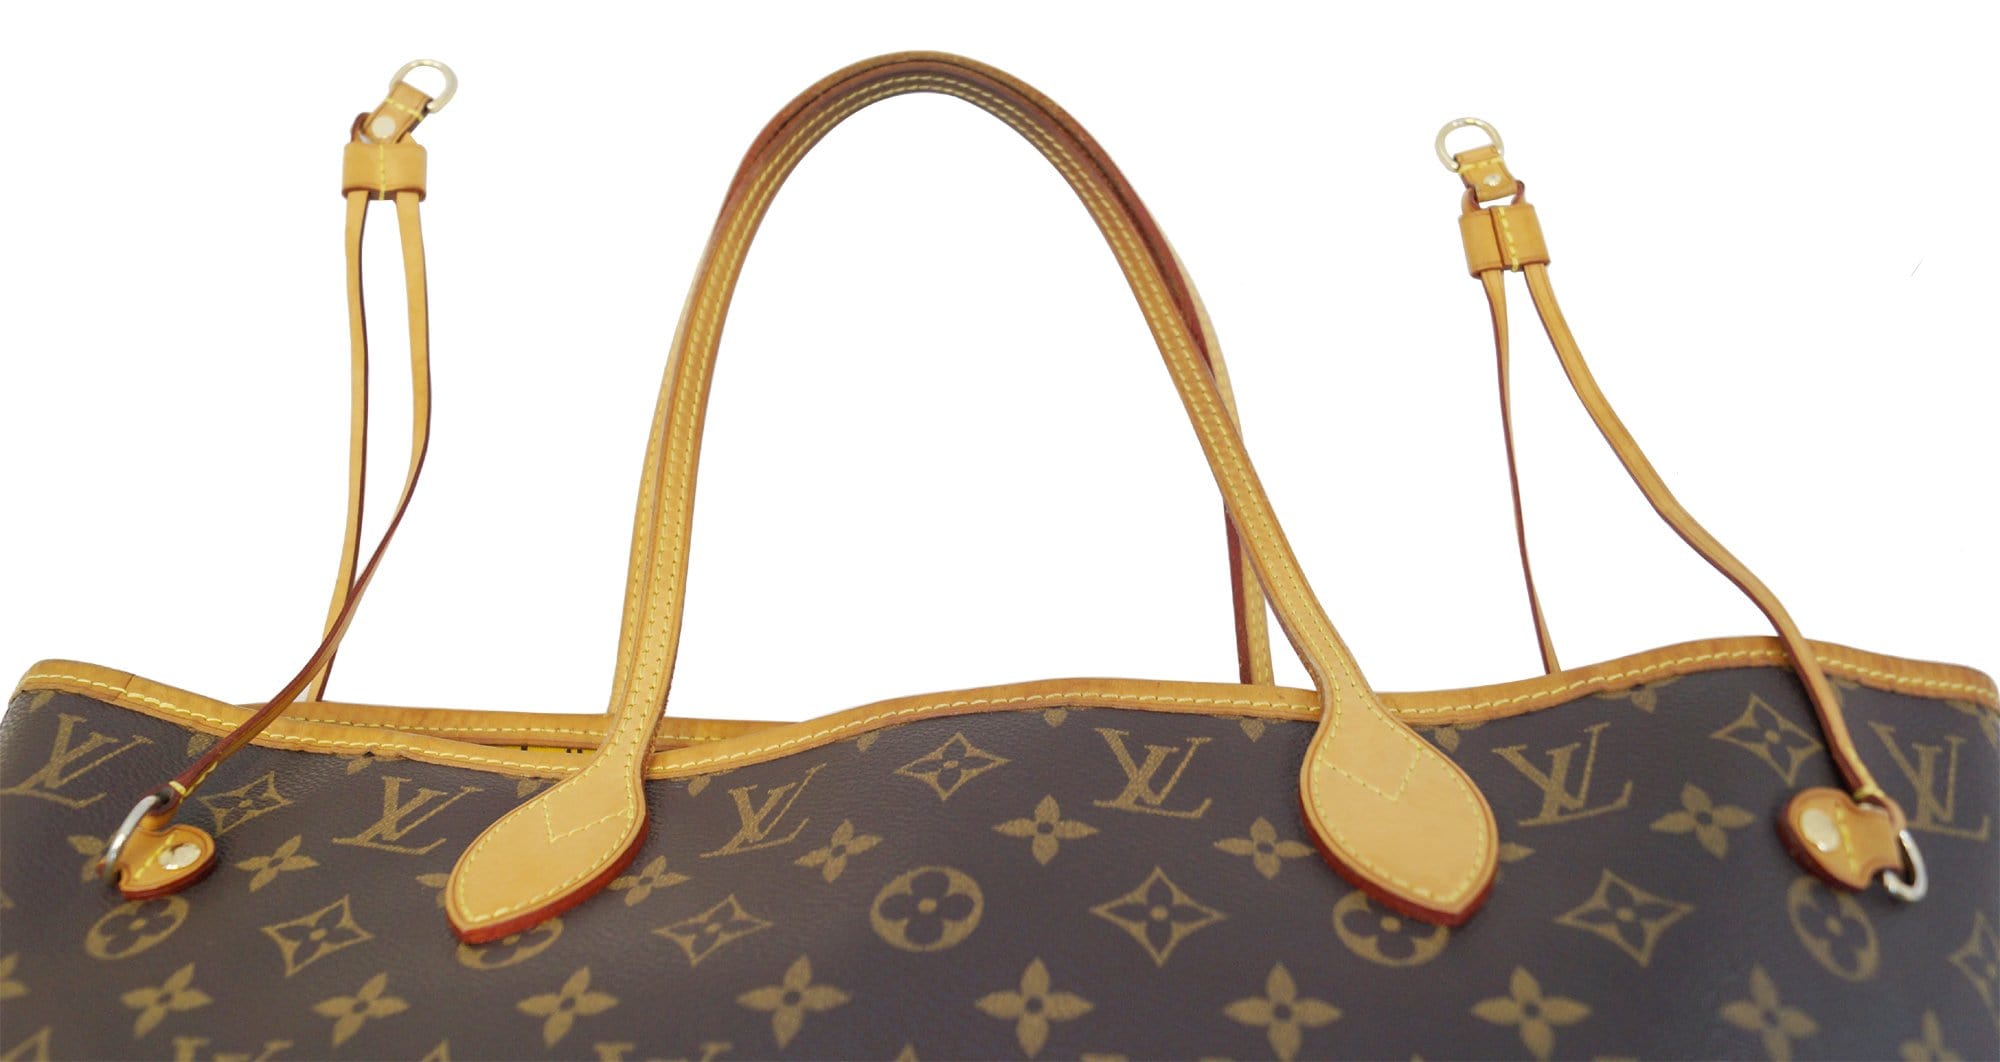 How Do You Clean The Inside Of A Louis Vuitton Neverfull Bag